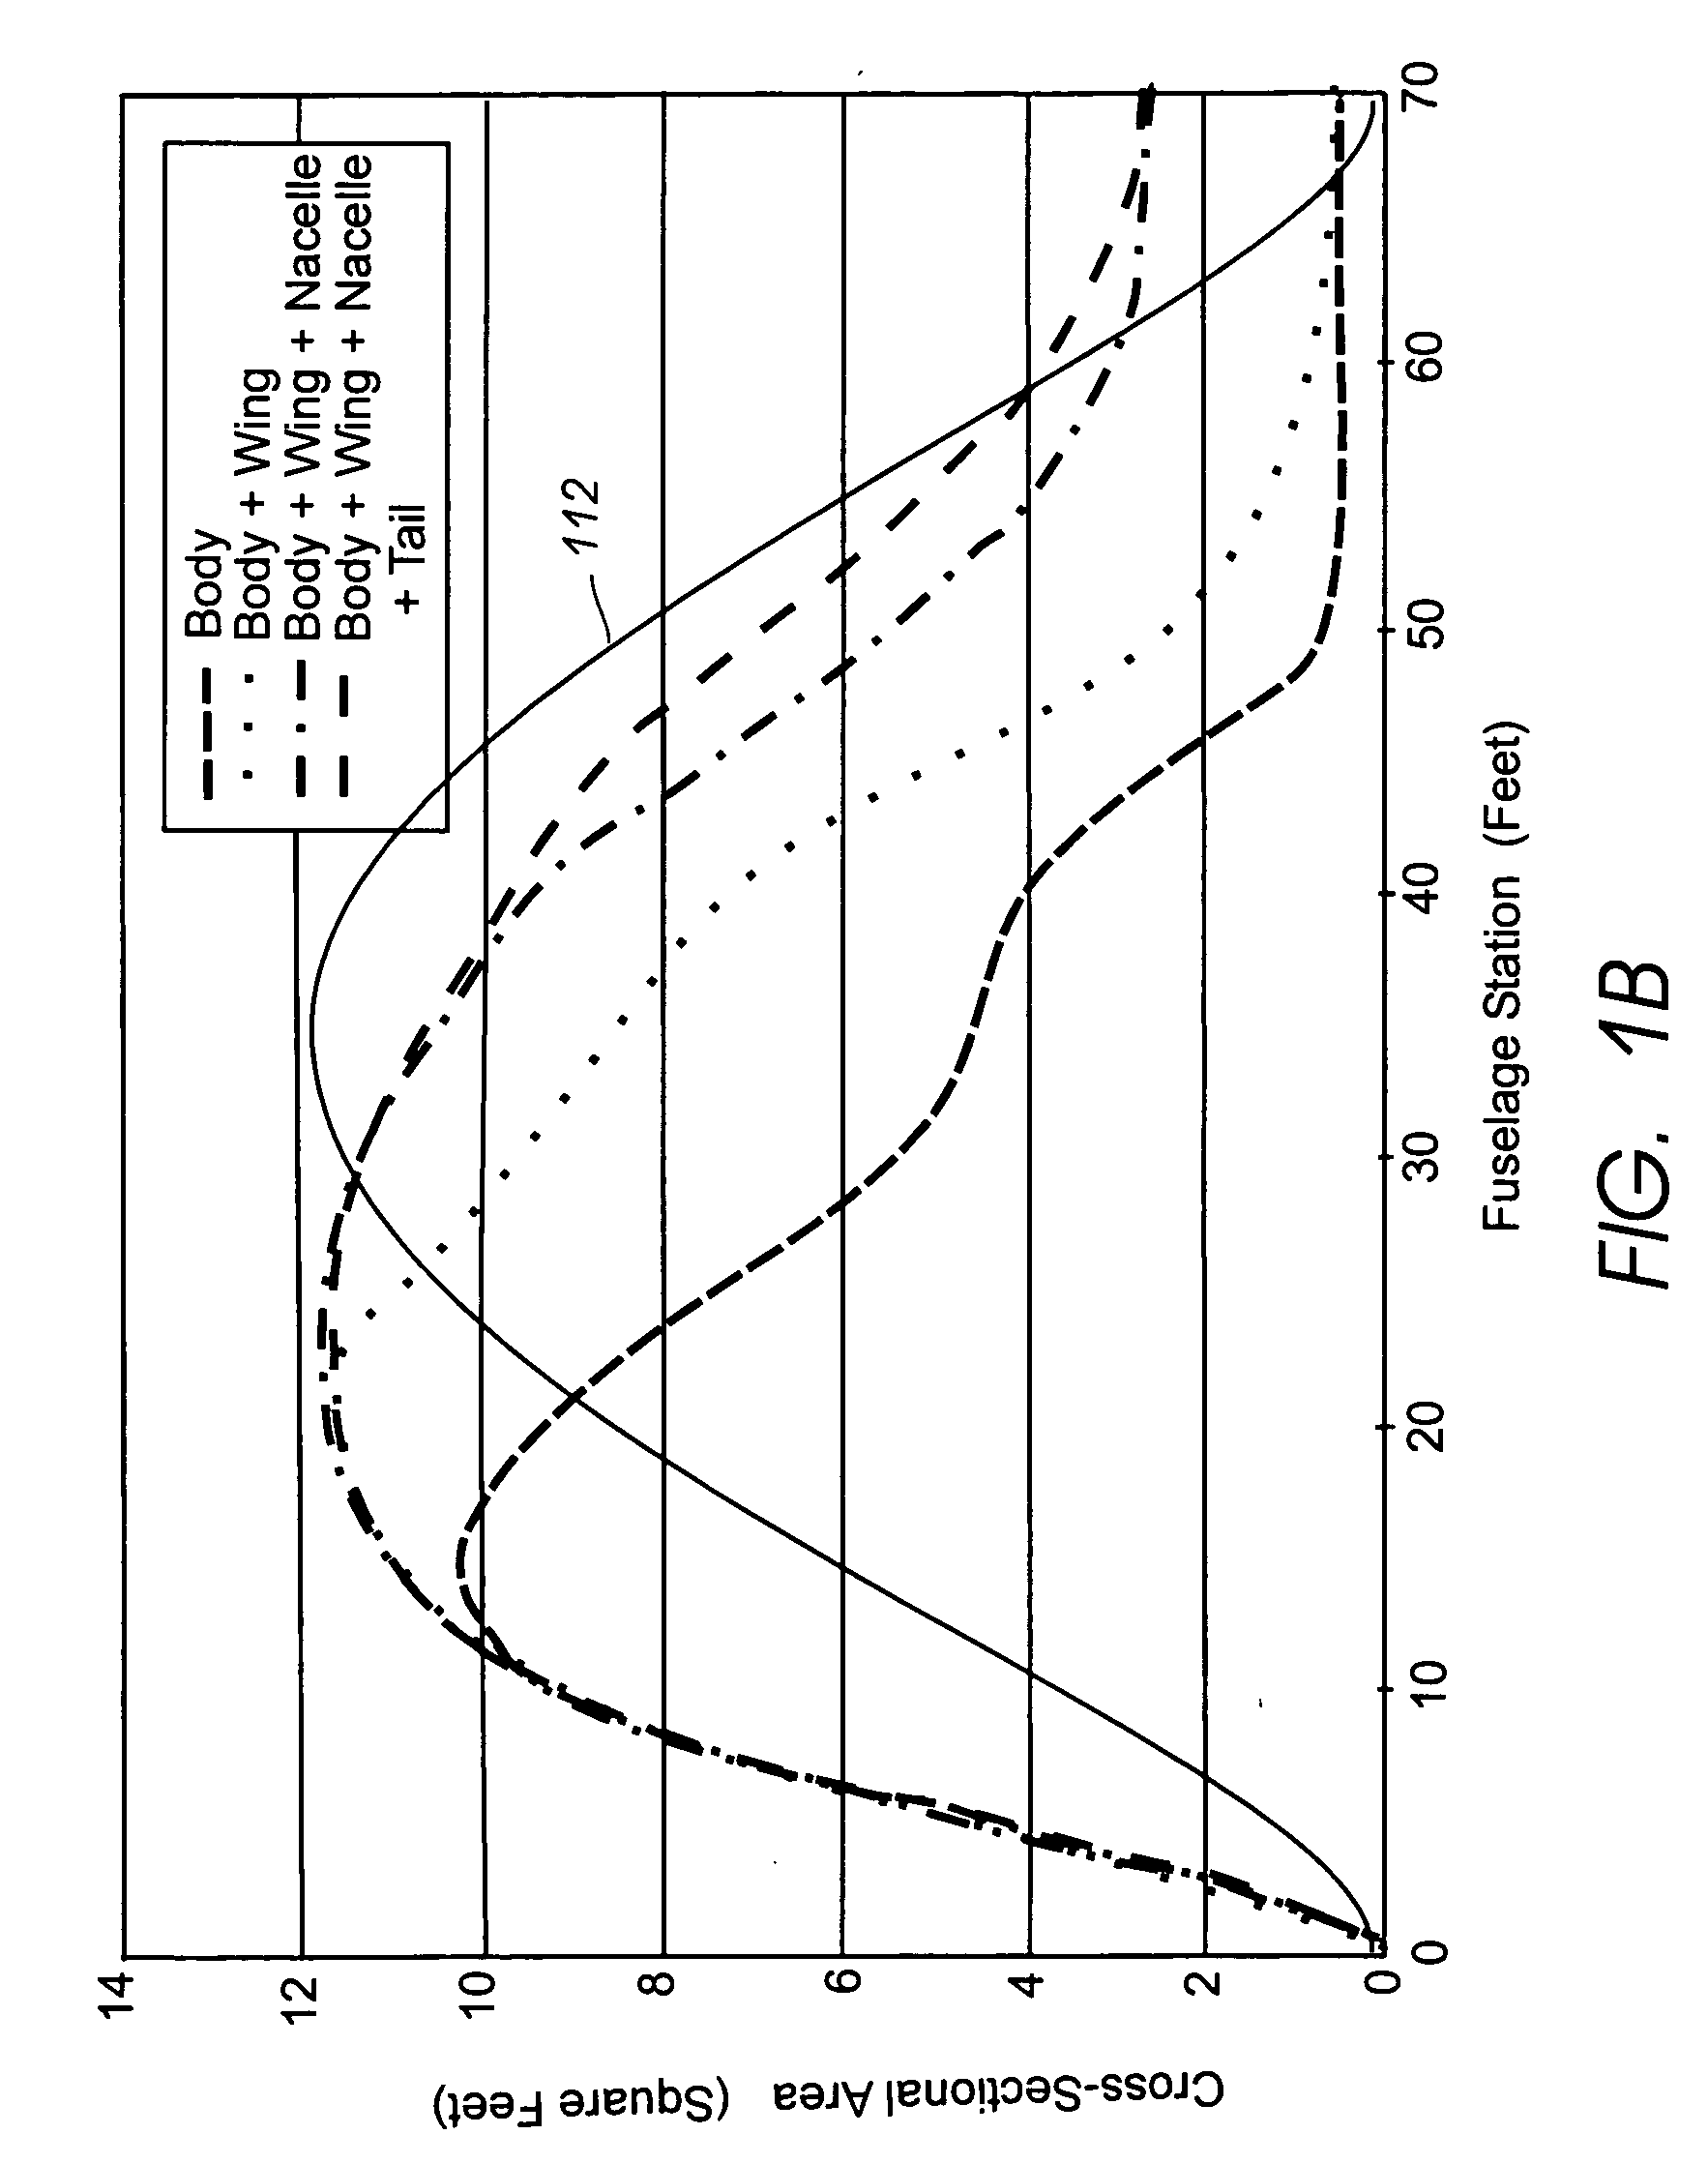 Area ruling for vertical stabilizers